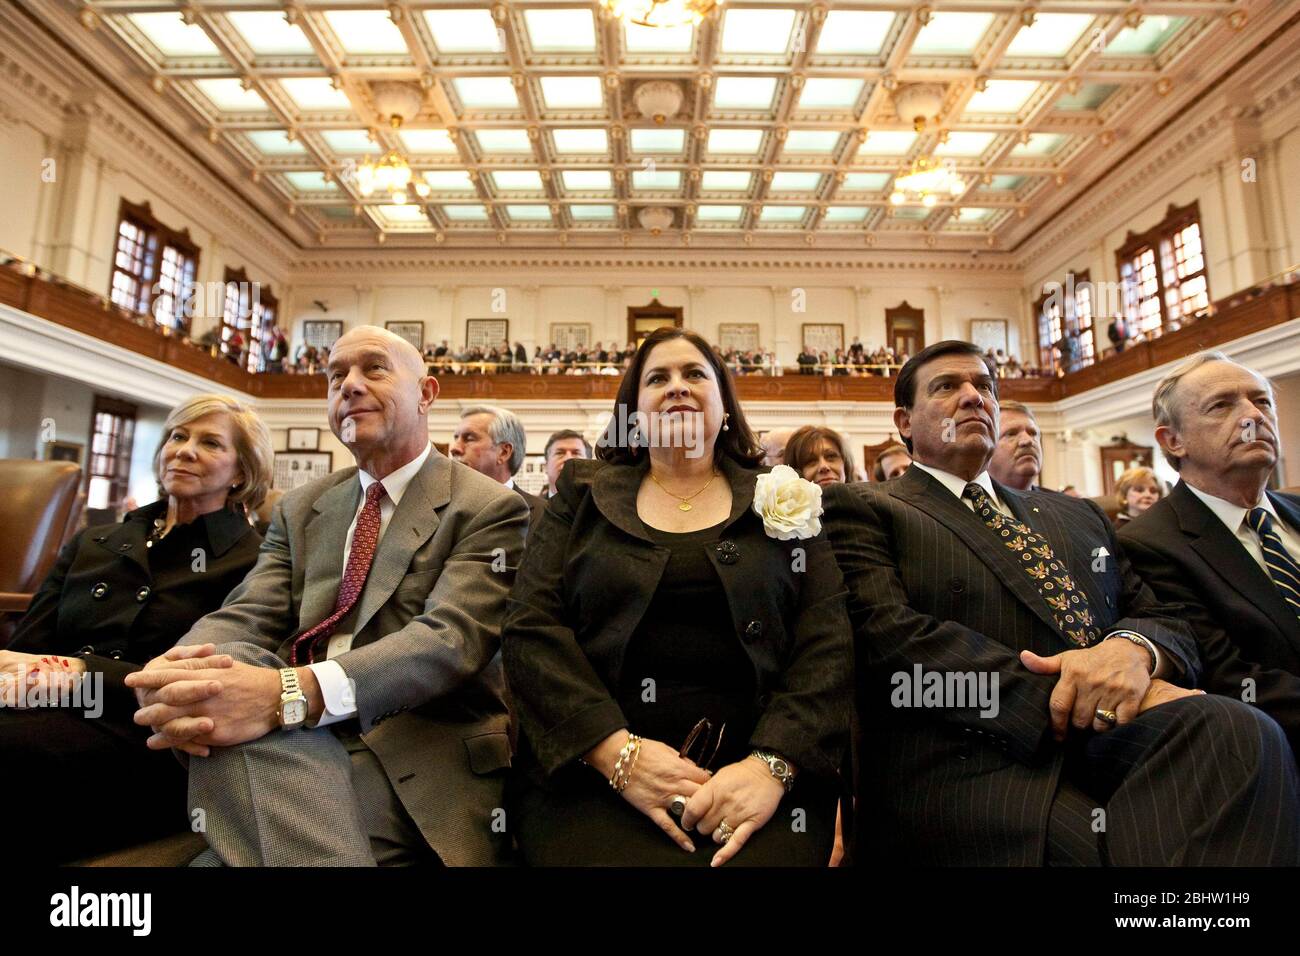 Austin Texas USA, February 8, 2011: Texas State Senators (left to right) Florence Shapiro, John Whitmire, Leticia Van de Putte, Eddie Lucio and Jeff Wentworth listen to the governor's State of the State speech at the Texas Capitol. ©Marjorie Kamys Cotera/Daemmrich Photography Stock Photo